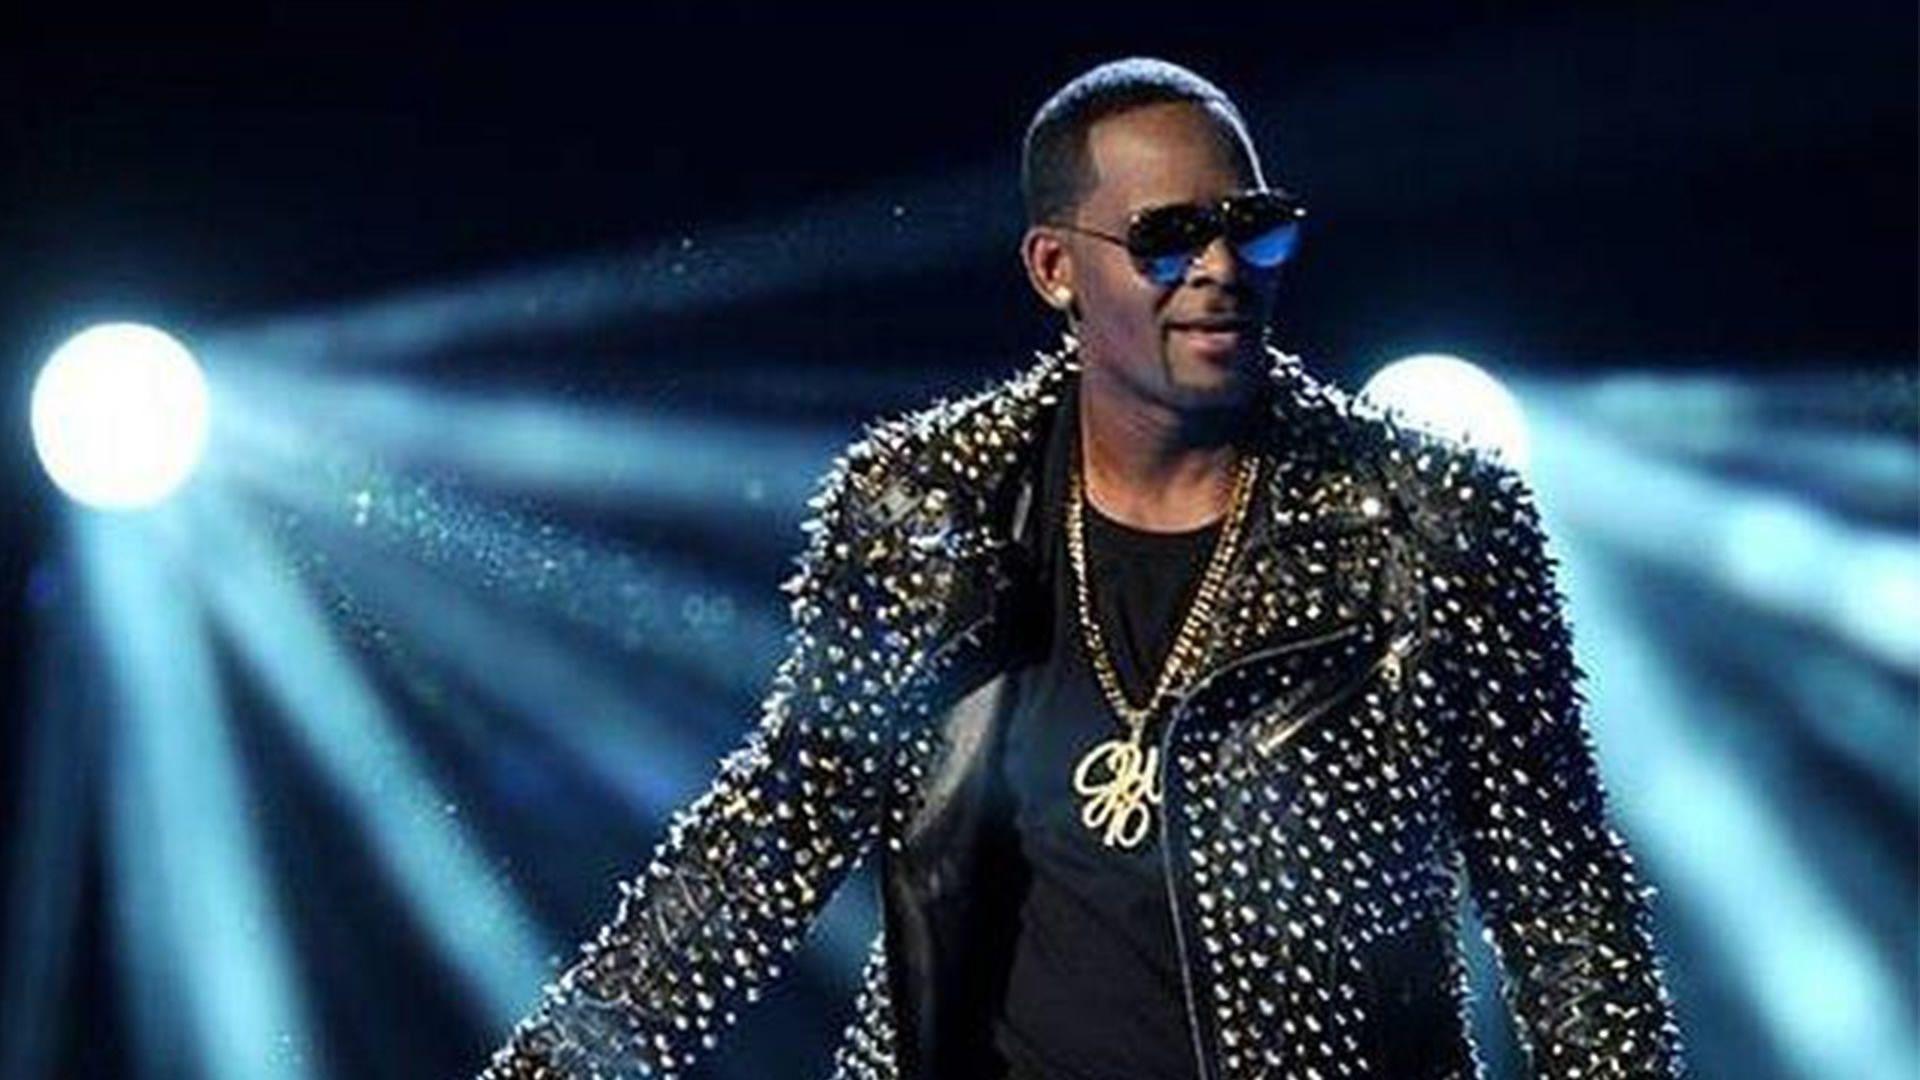 Has R. Kelly's past rumors finally caught up with him?